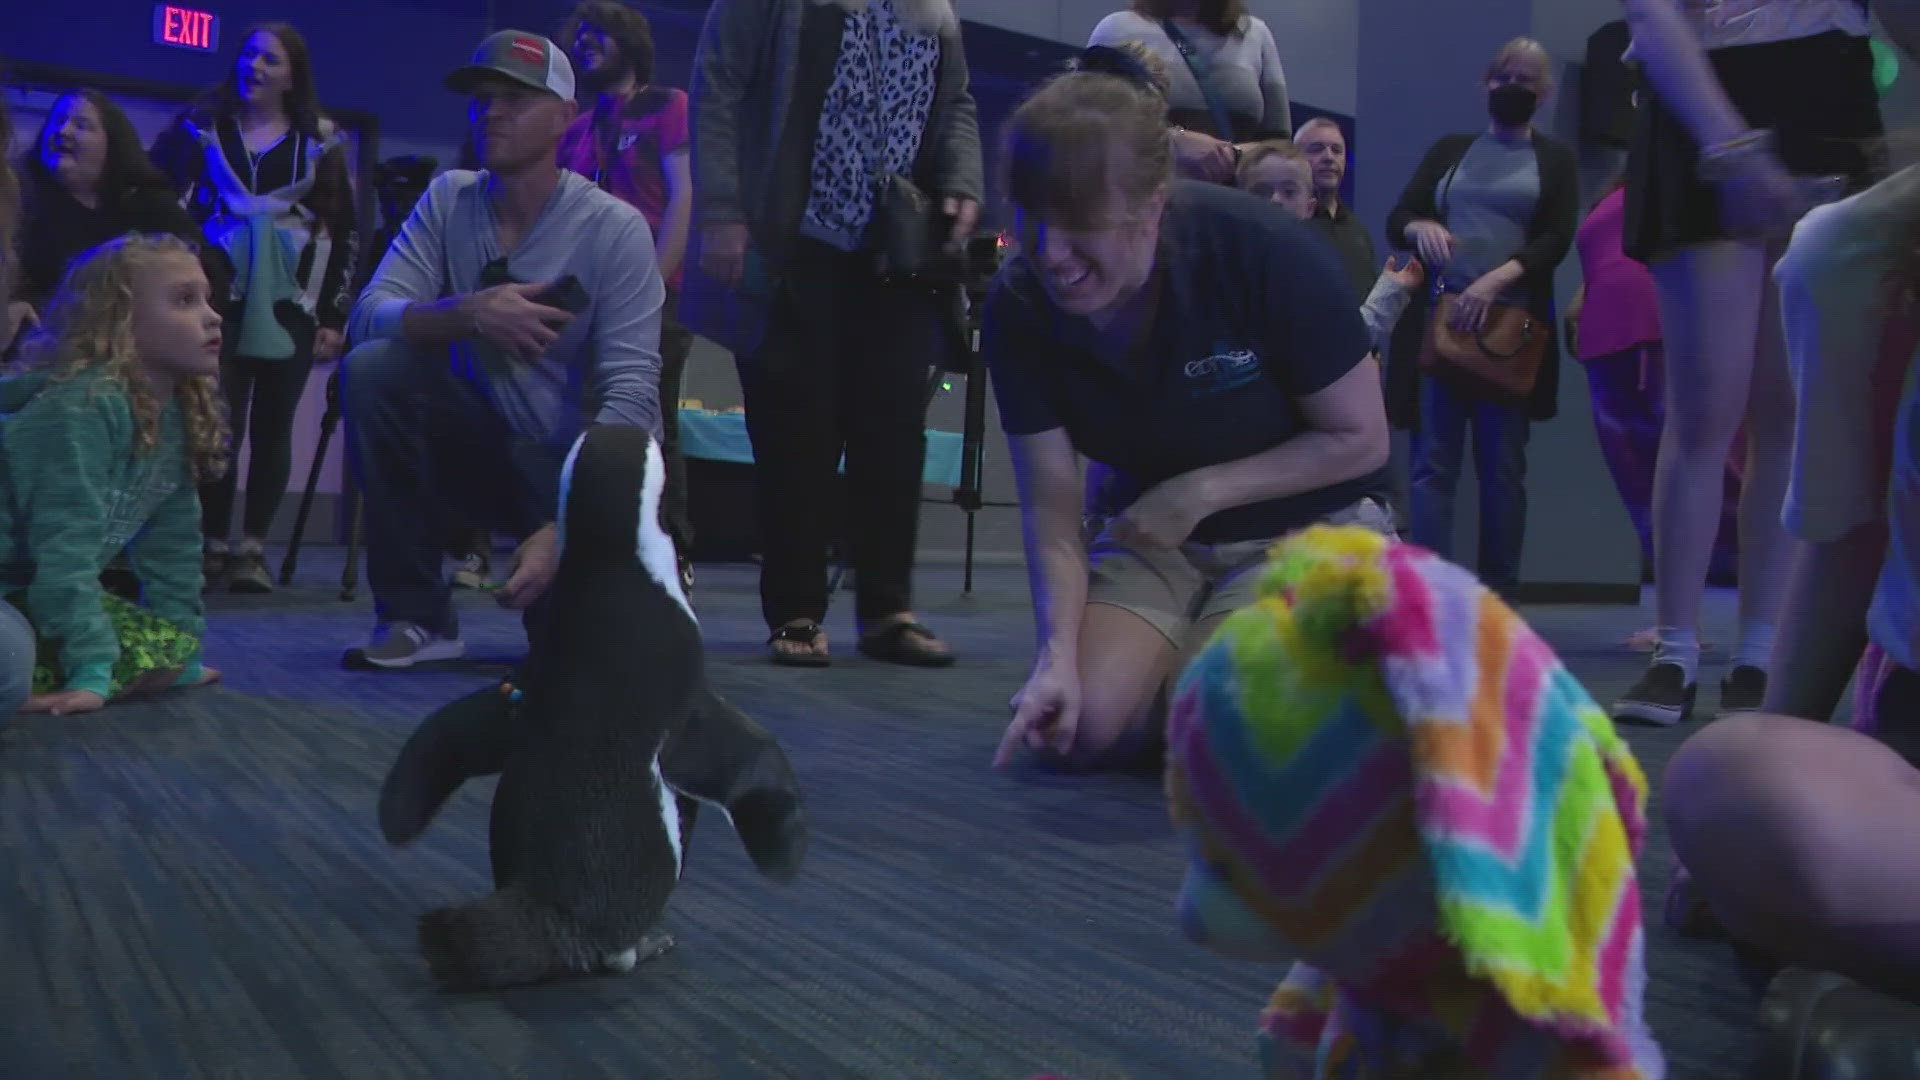 Rosie the disabled penguin hosted a special 'Swifty" dance party for some amazing kids who have overcome obstacles of their own